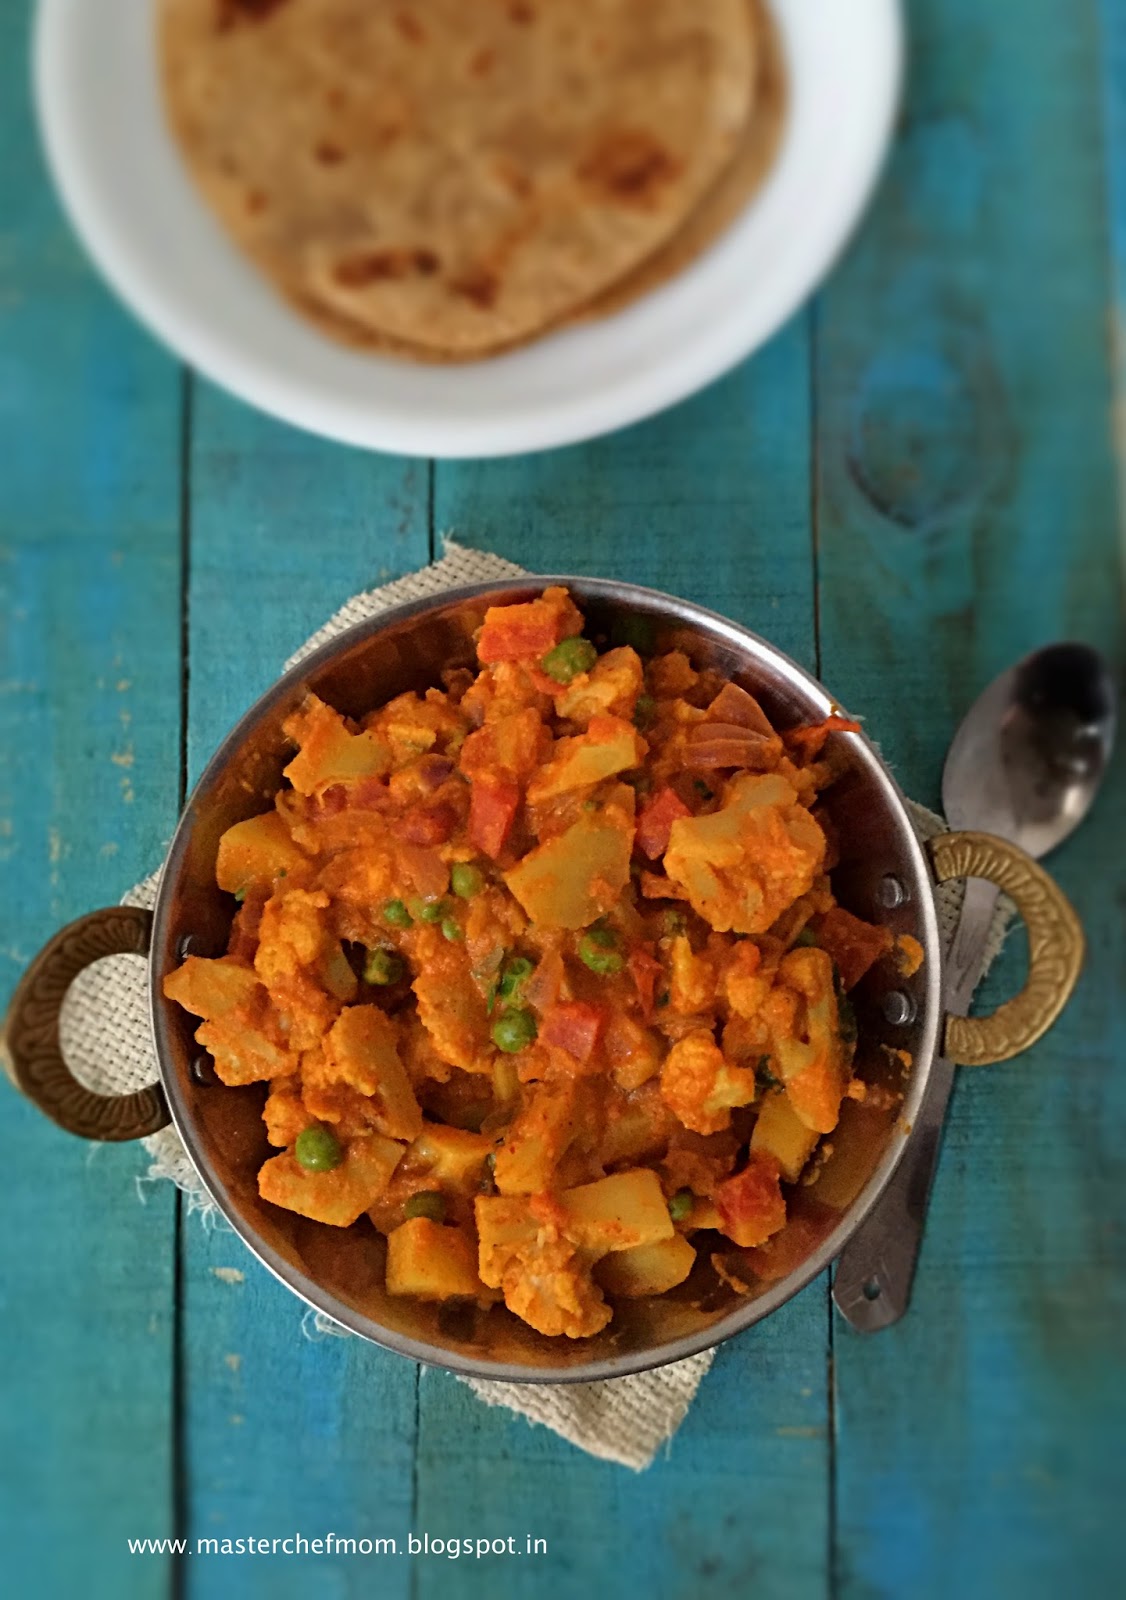 MASTERCHEFMOM: Restaurant Style Mixed Vegetable Curry | A Blend of ...